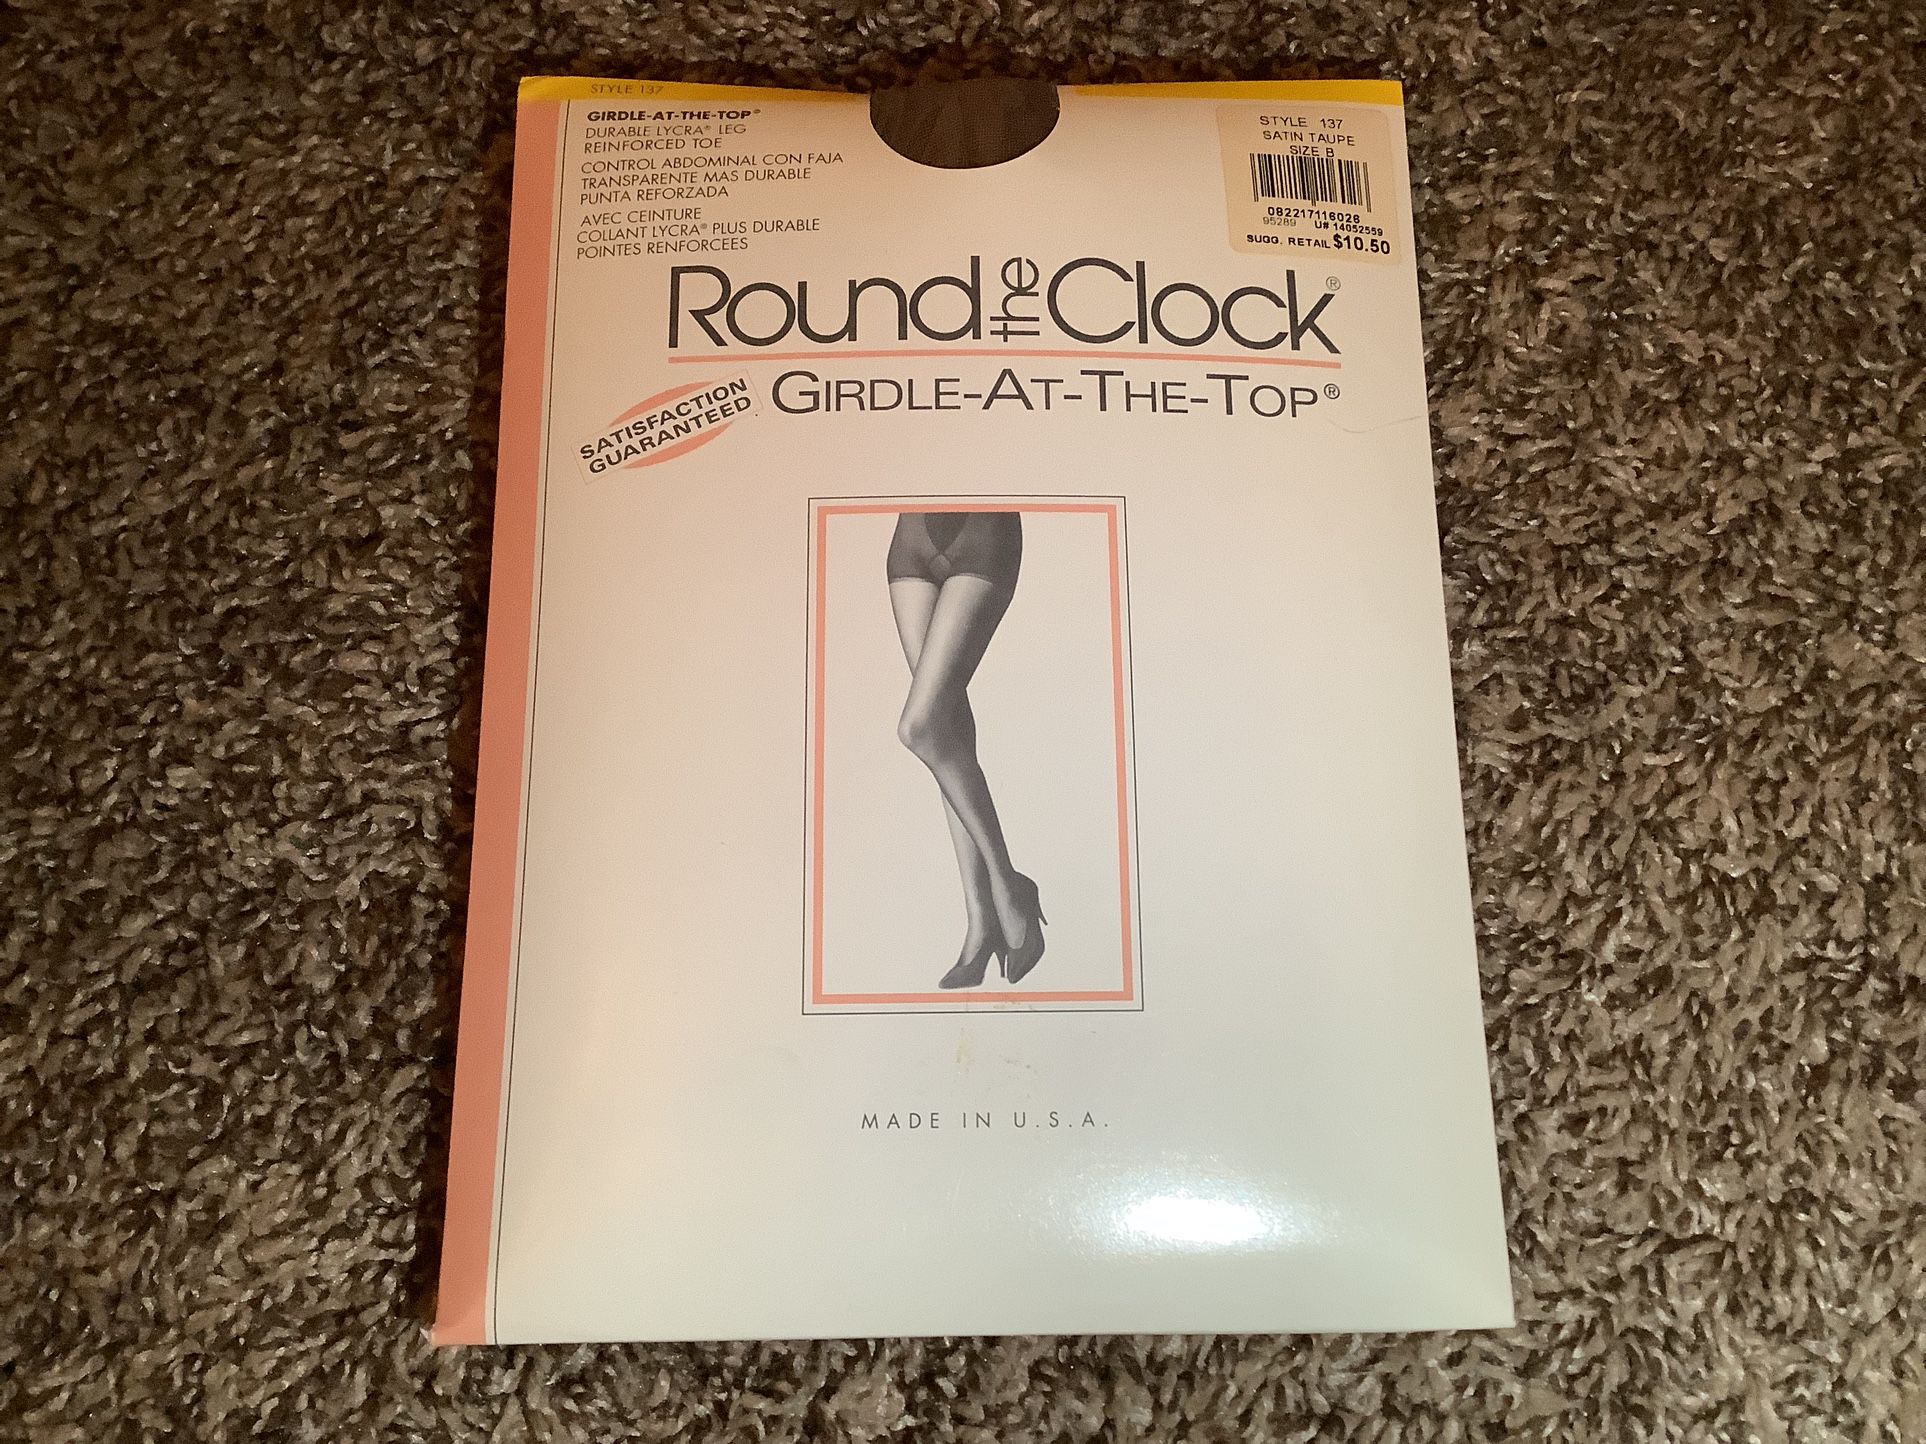 Round the Clock girdle top pantyhose, color satin taupe, size: B